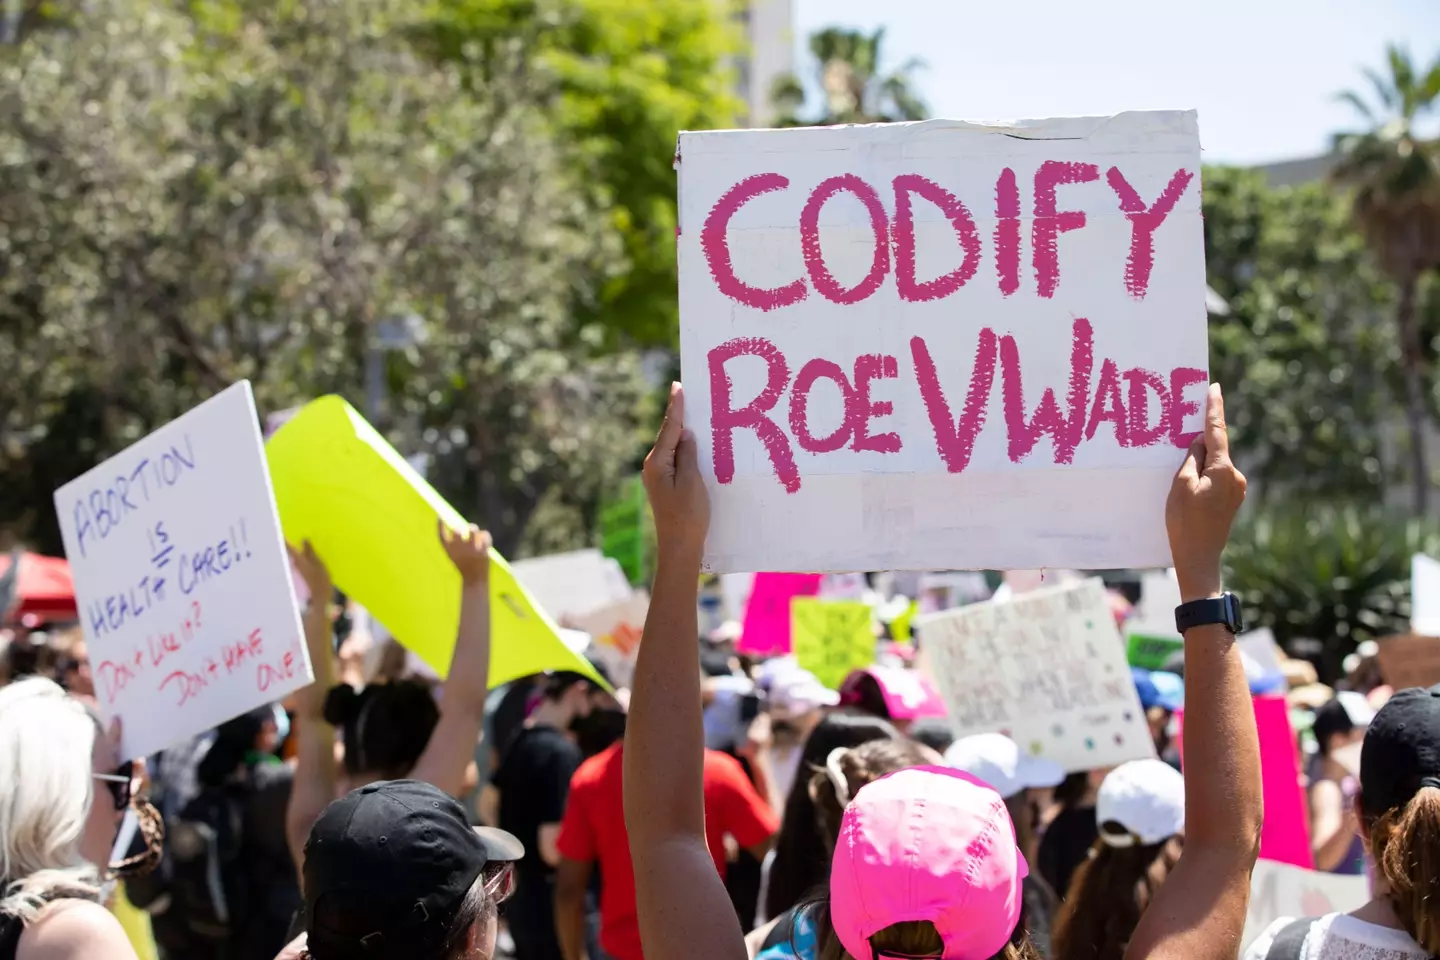 People took to the streets to protest the overturning of Roe V Wade.